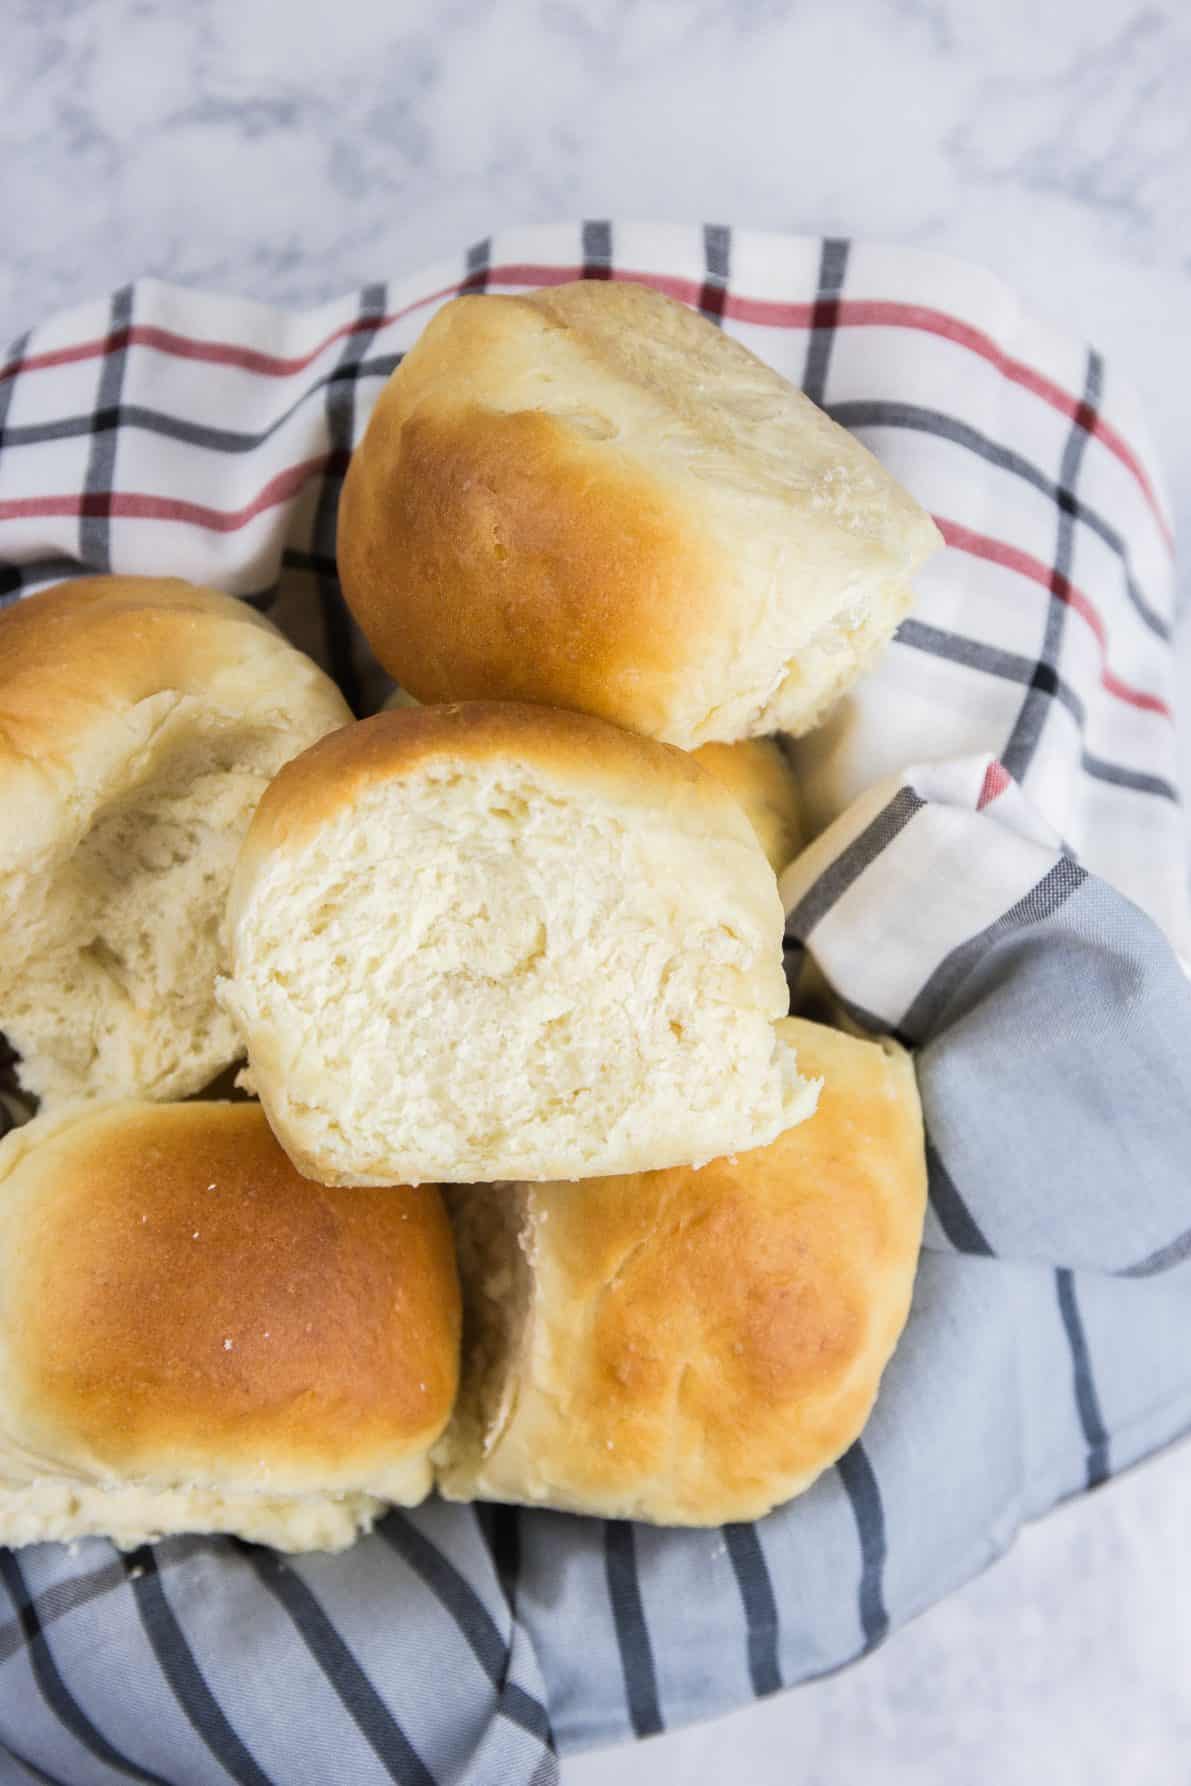 Milk bread rolls piled up in a bowl with a plaid towel.